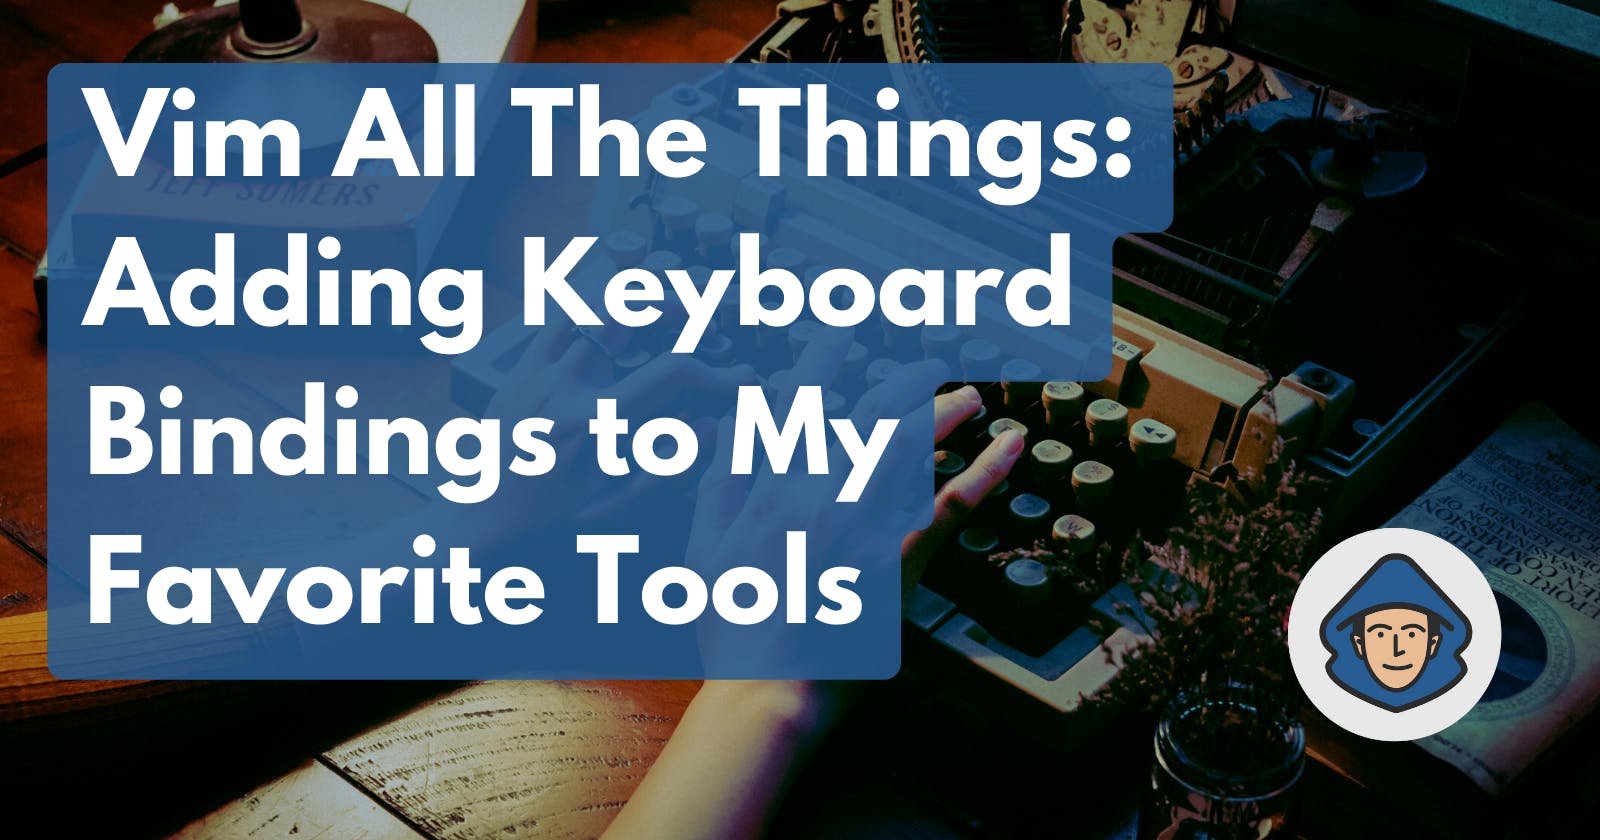 Vim All The Things: Adding Keyboard Bindings to My Favorite Tools